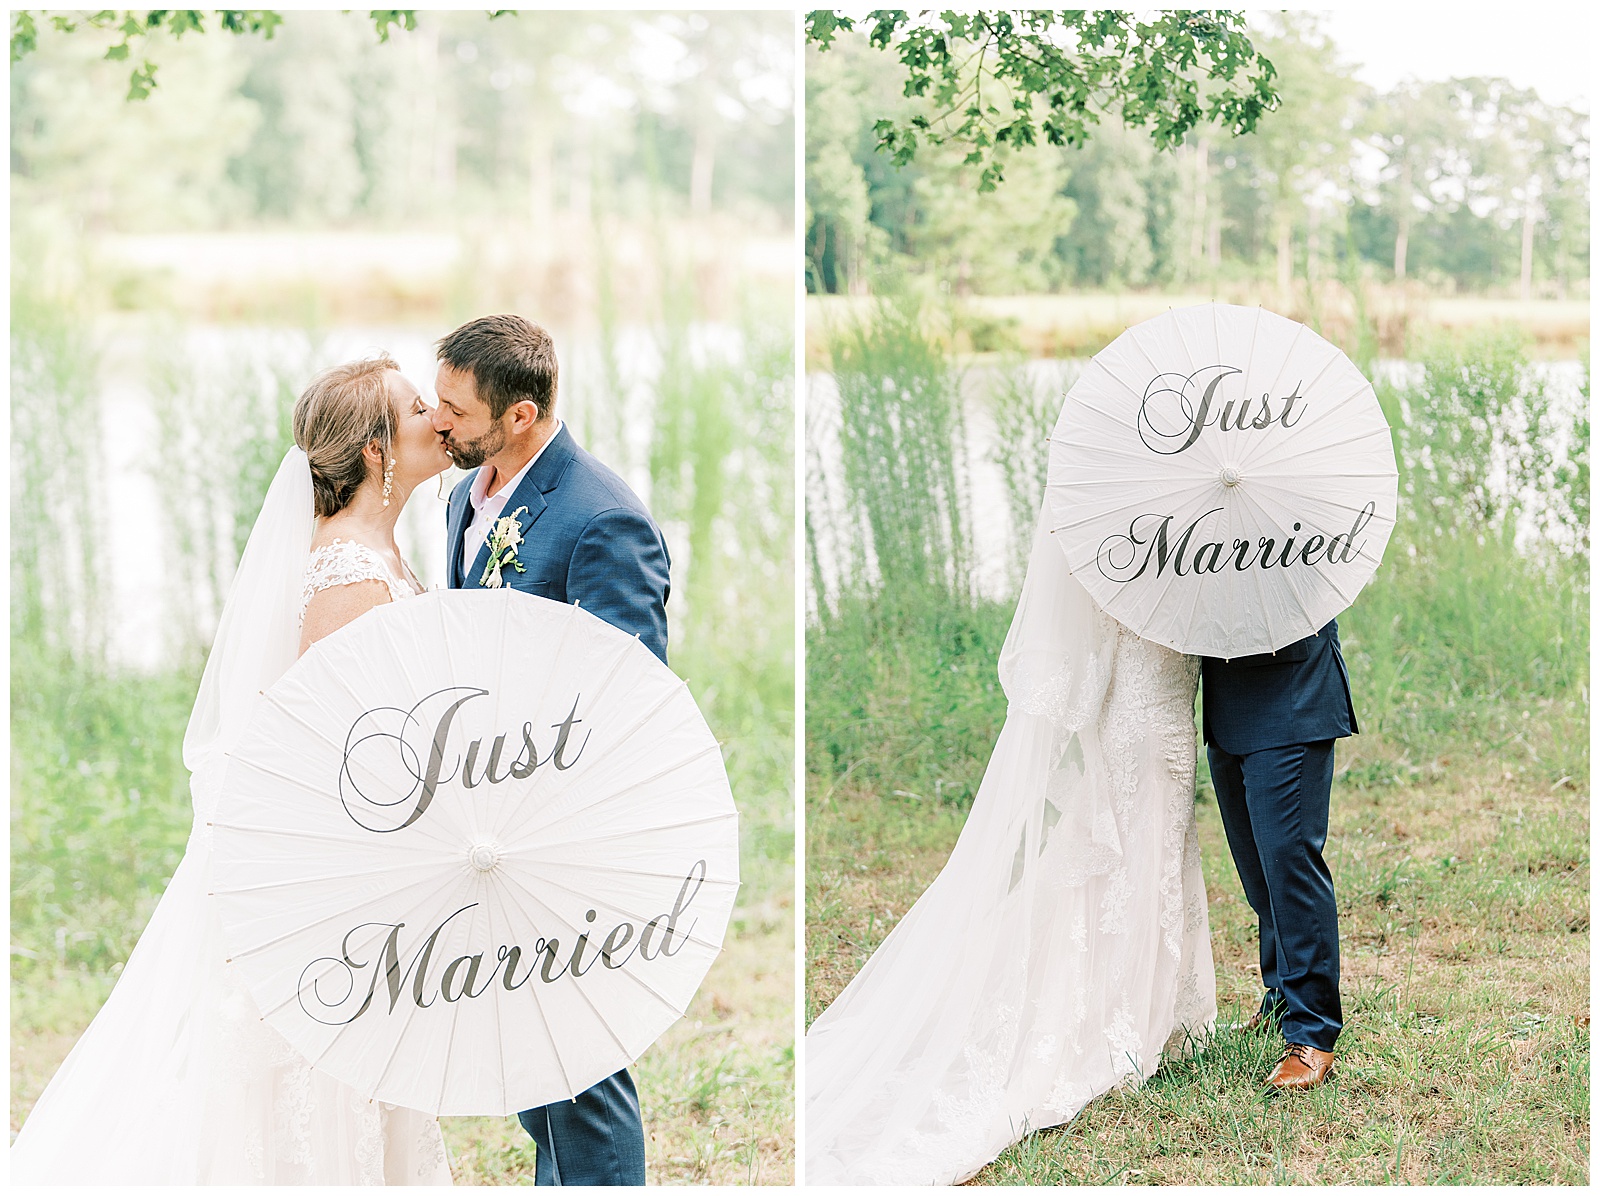 just married parasol shots with blond haired bride and navy blue suit groom in outdoor summer wedding portraits